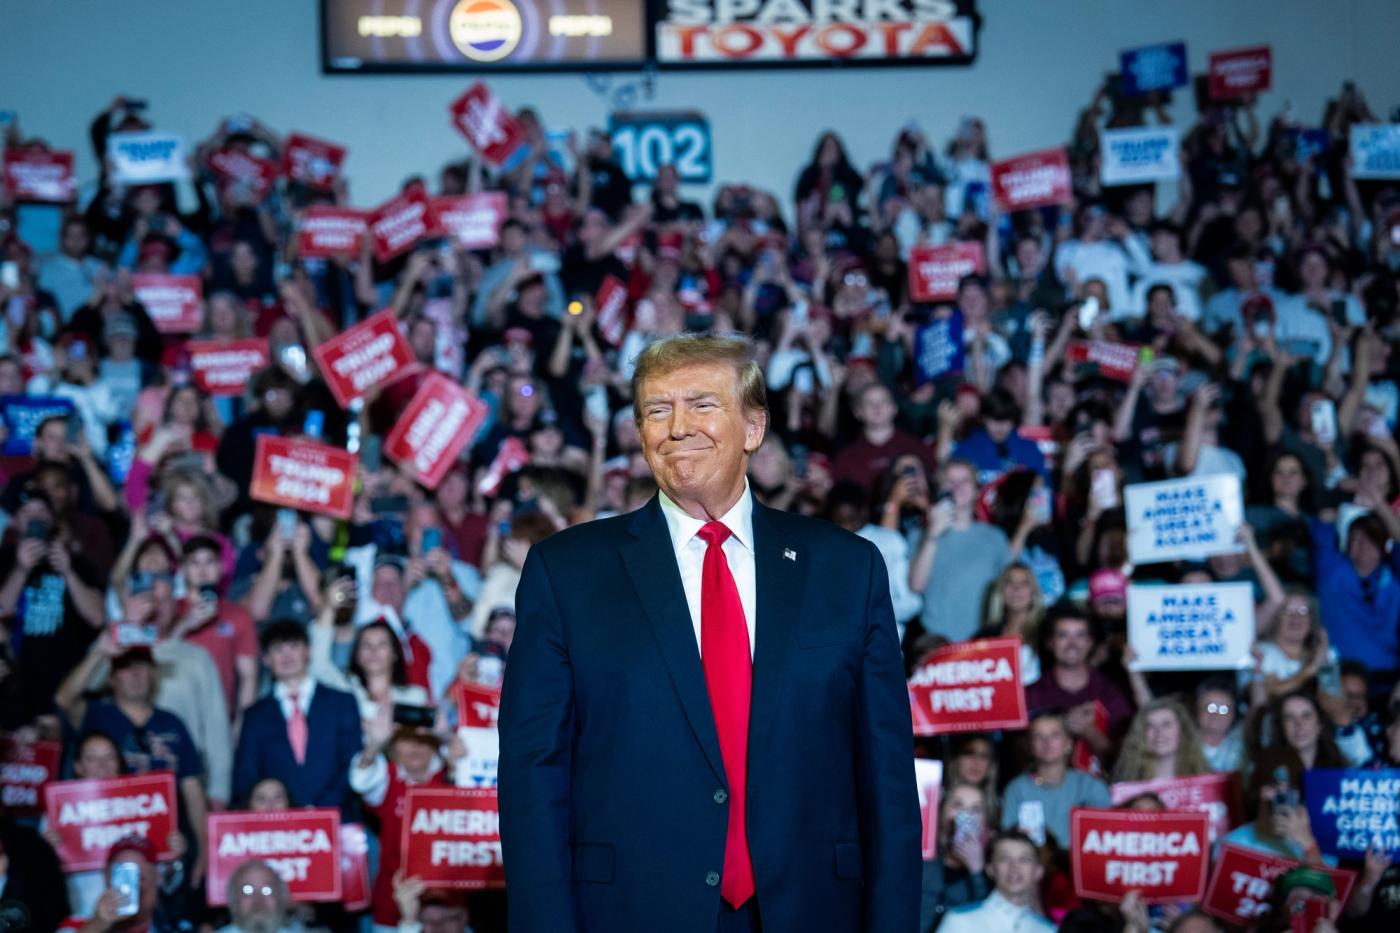 Republican presidential candidate and former President Donald Trump walks out to speak at a Get Out The Vote campaign rally held at Coastal Carolina University in Conway, S.C., on Feb. 10, 2024.